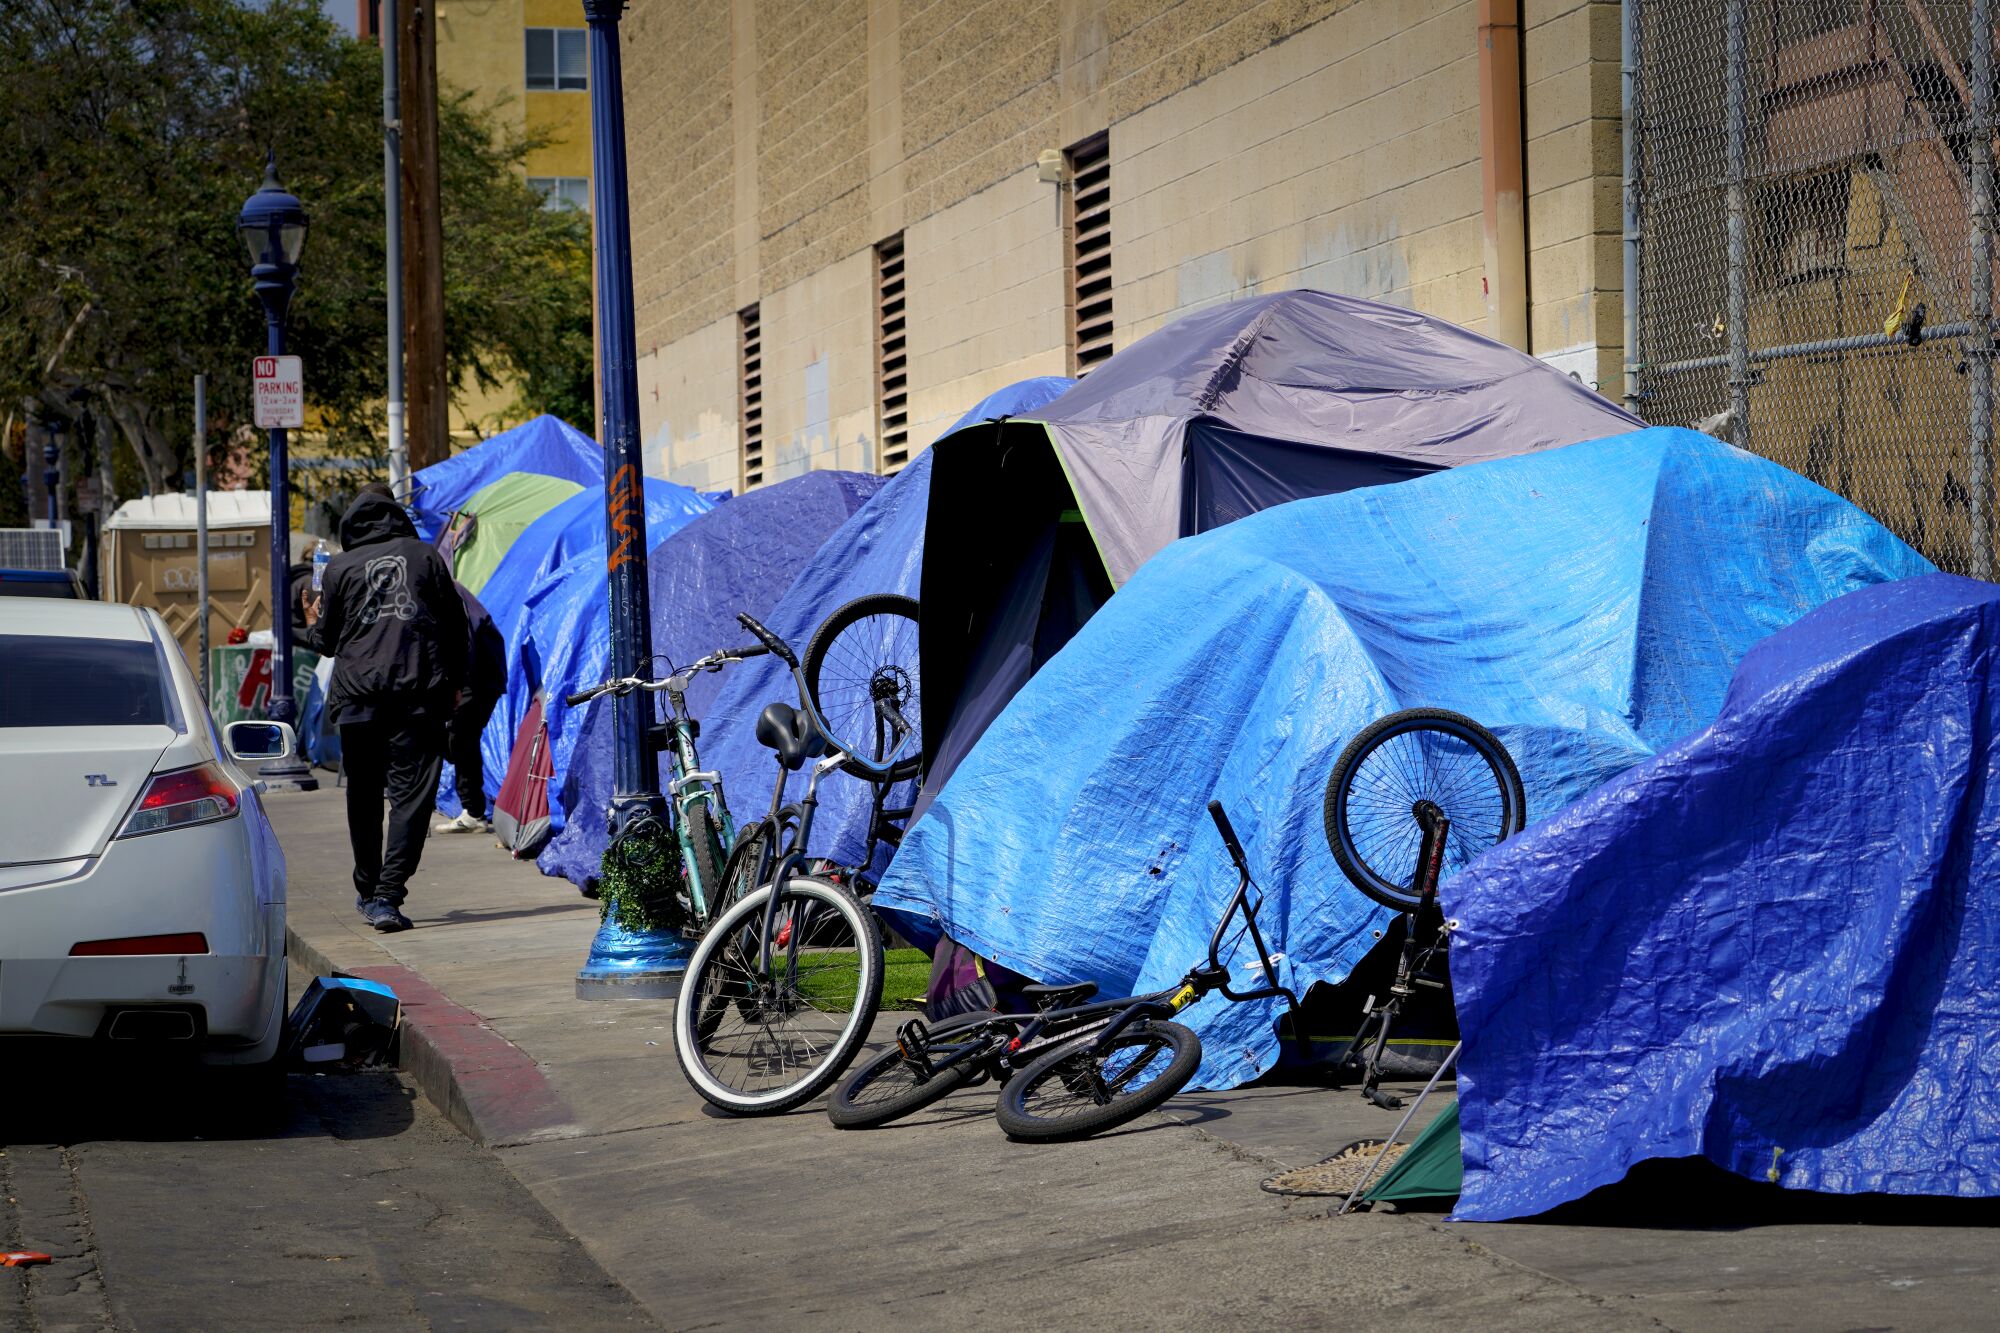 A row of tents in downtown San Diego.